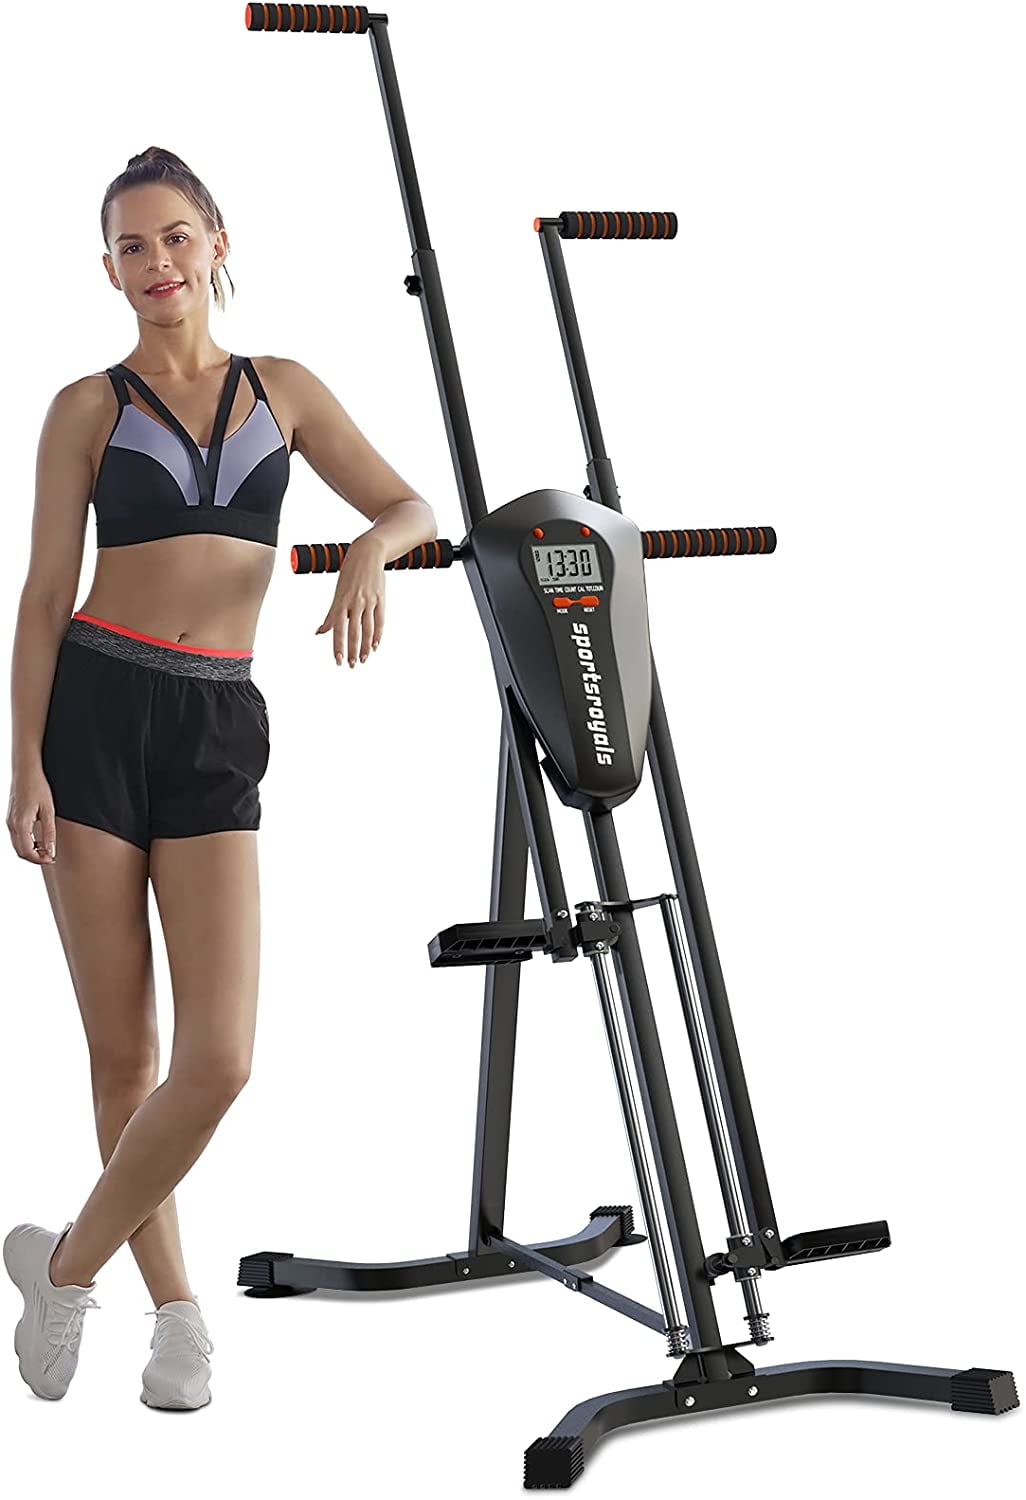 Total Gym S500 Attachable Cyclo Trainer with Digital Monitor for Home Workout Machines Black/Blue for sale online 